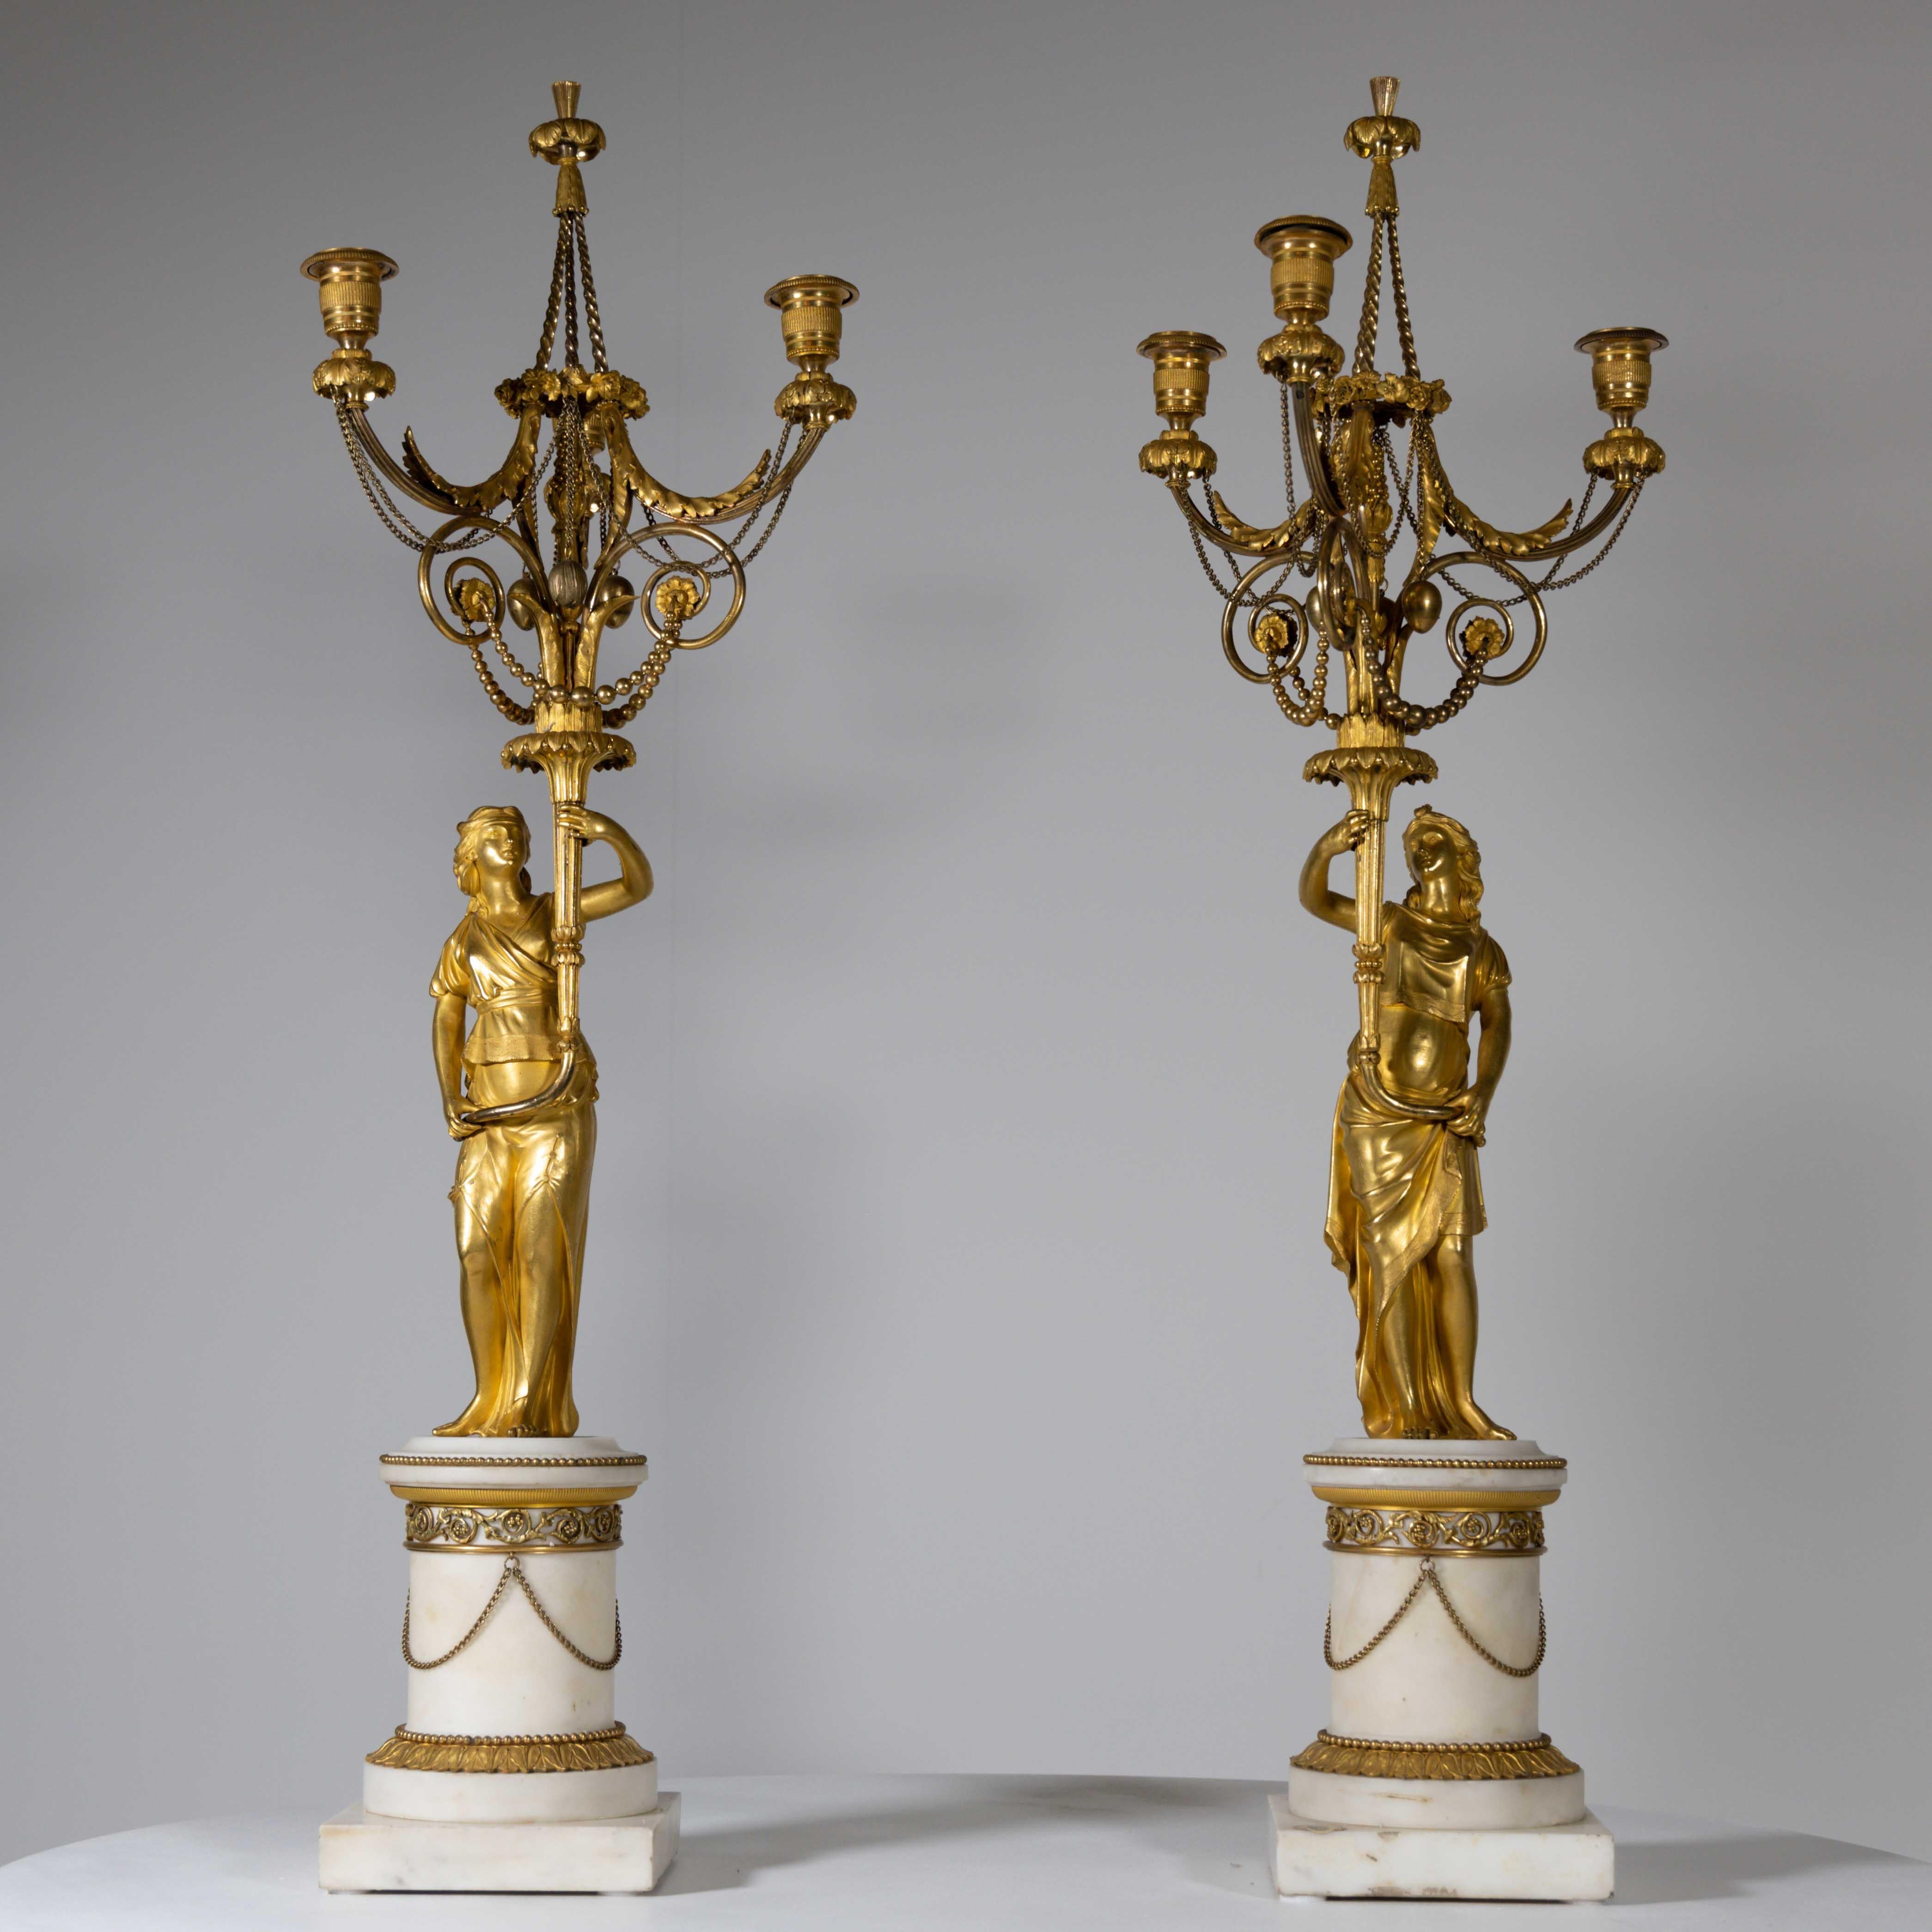 Pair of fire gilded girandoles with female torchbearers on white marble pedestals with gilded bronze applications. The female figures carry the three-flame candelabrum with garlands of link and pearl chains as well as leaf decorations and a central